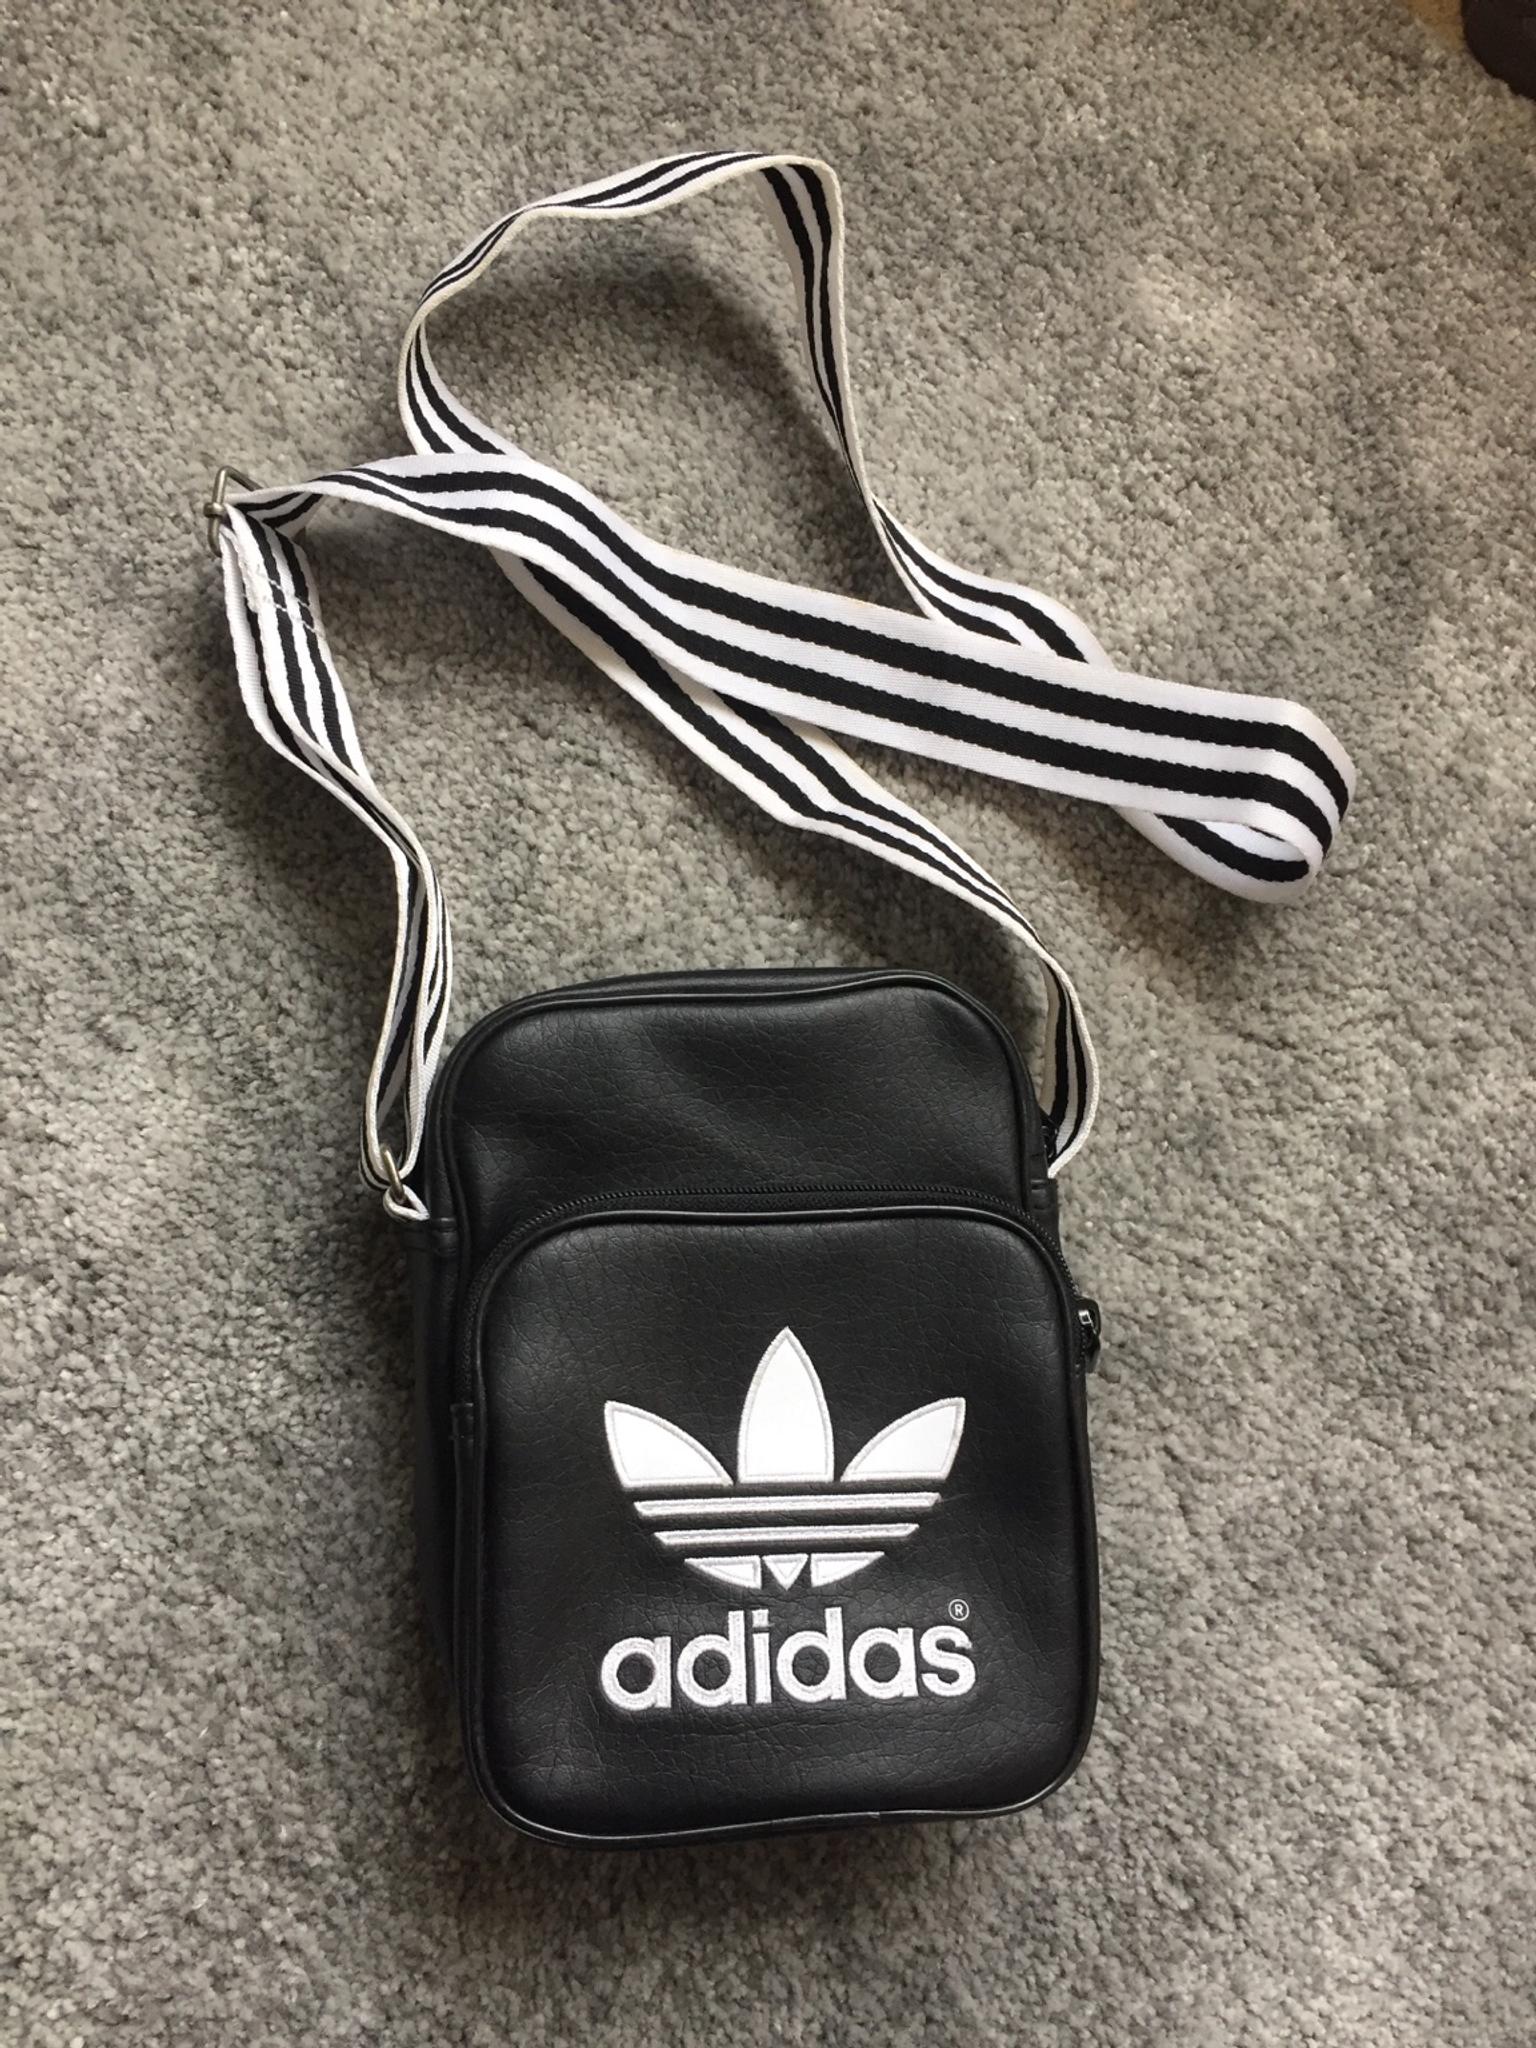 Adidas Man-Bag in BN22 Eastbourne for 